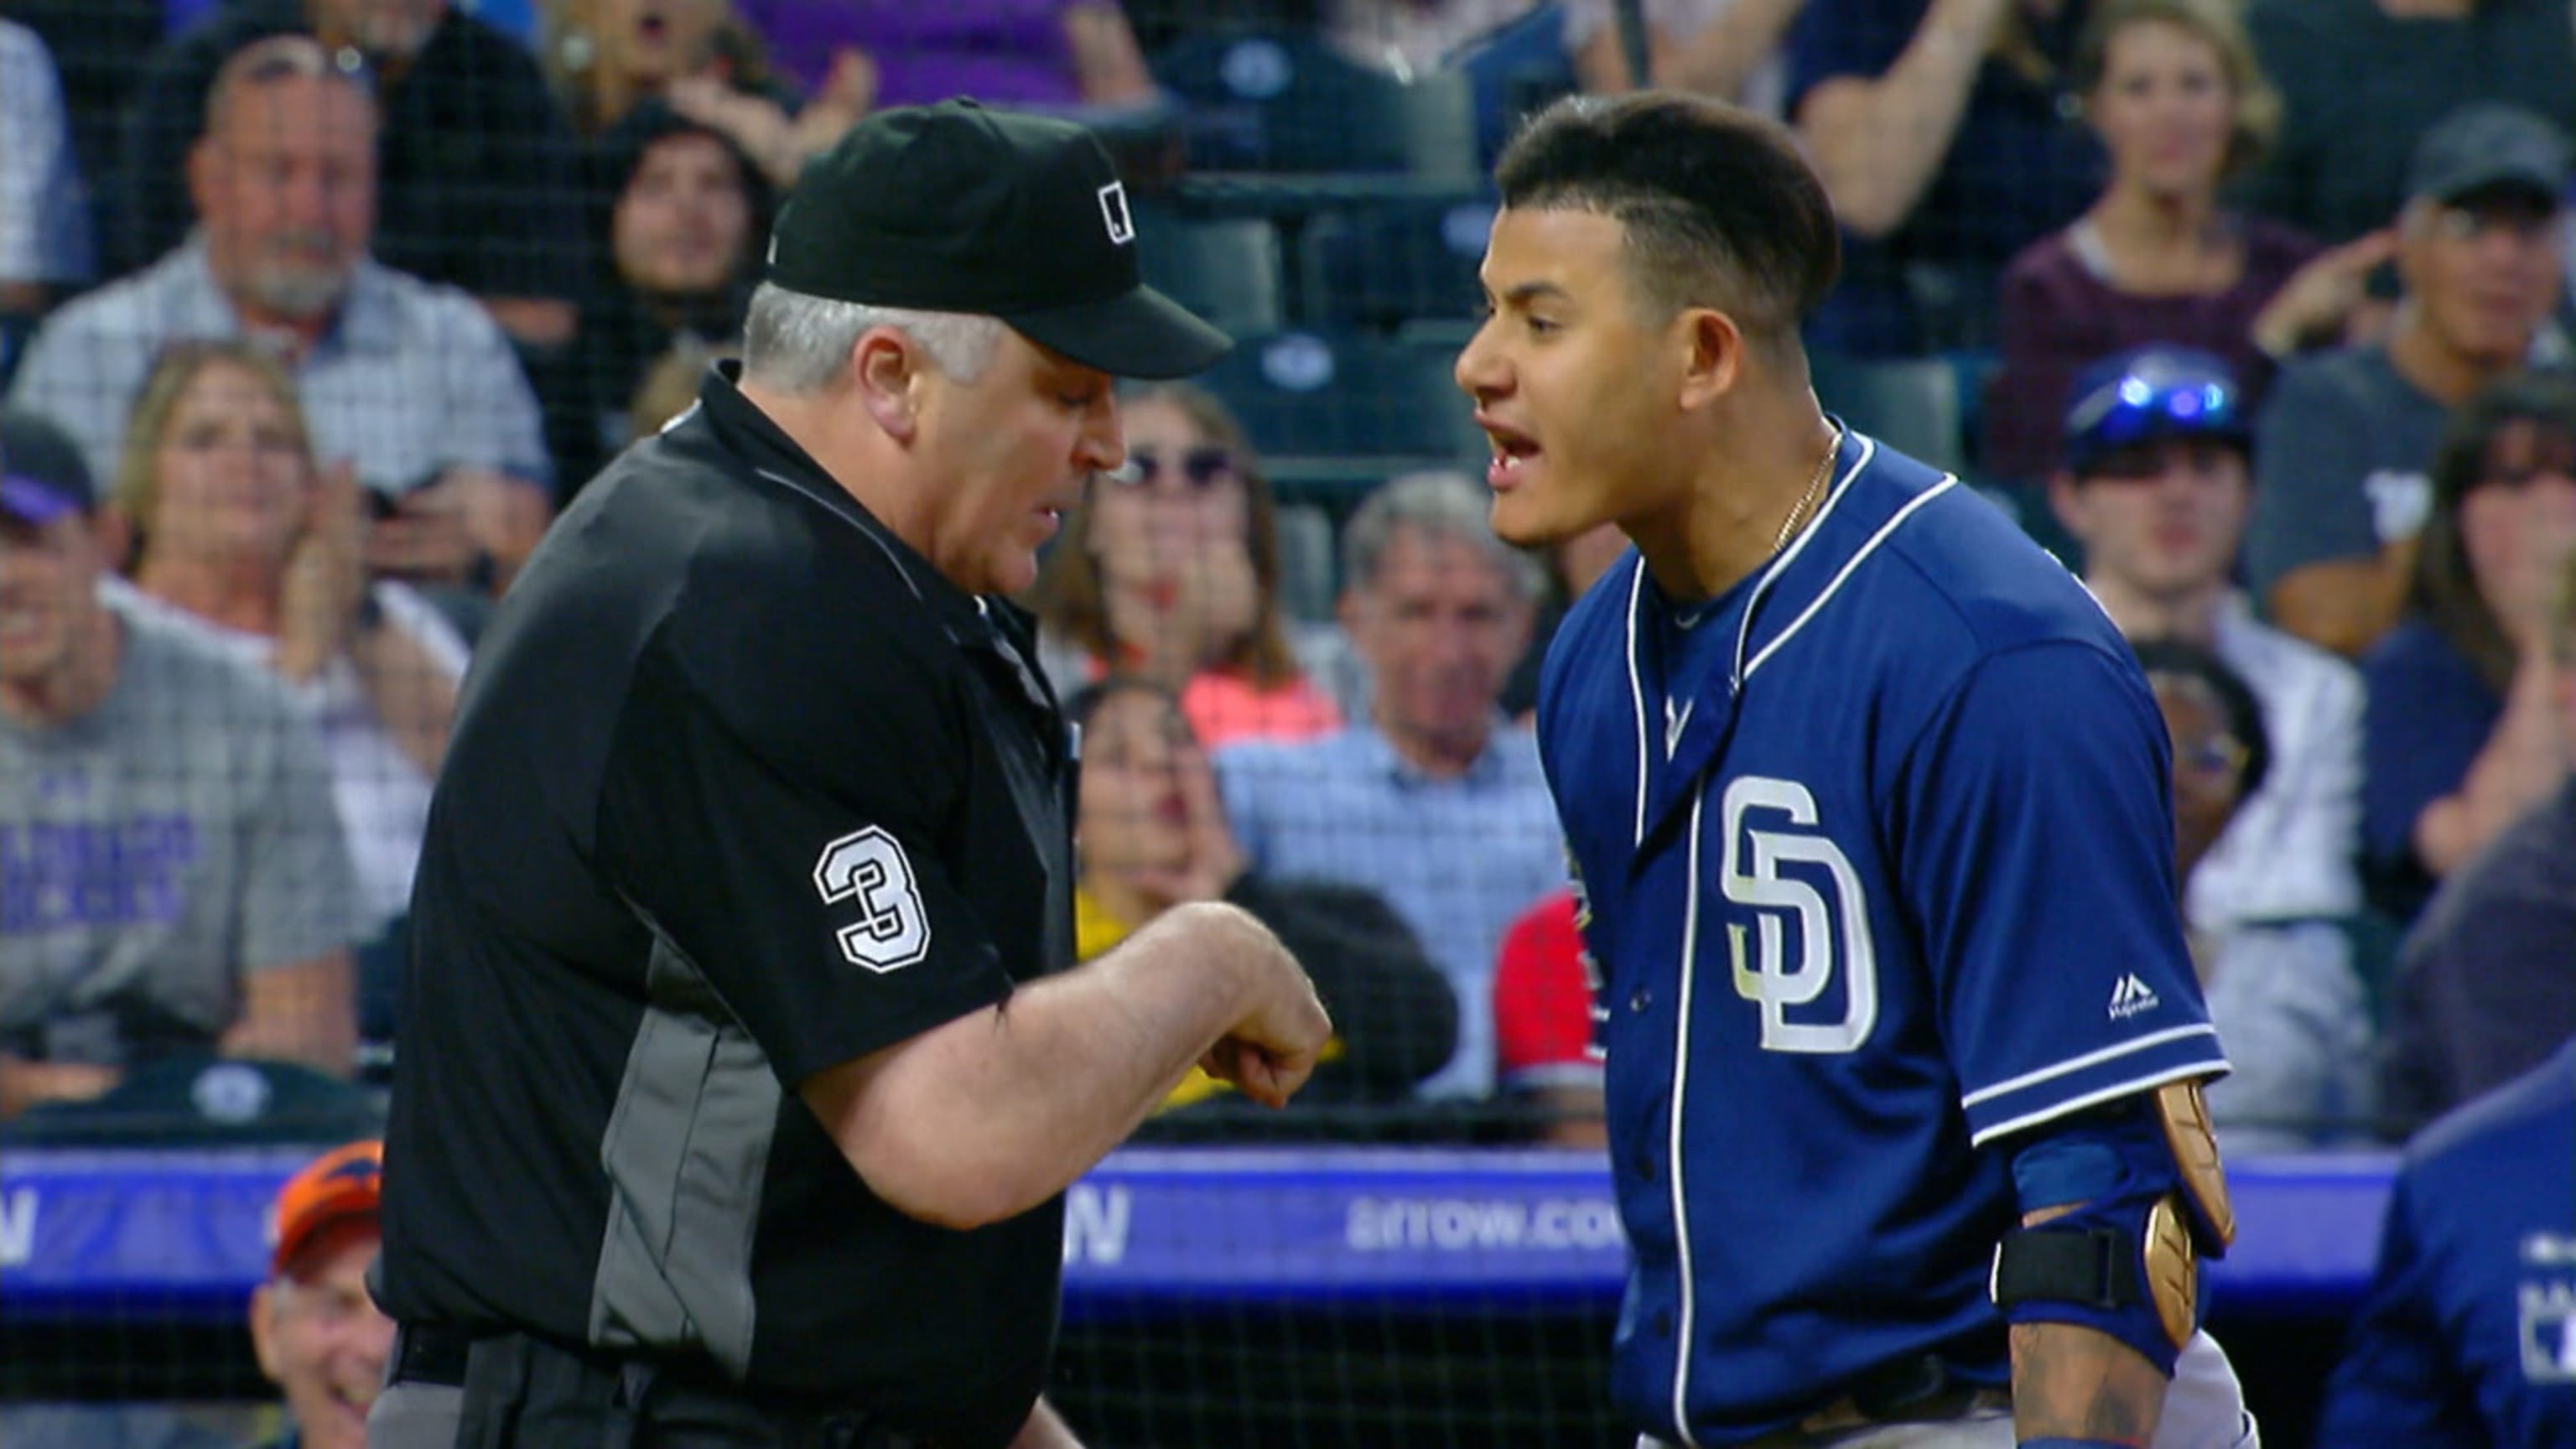 Manny Machado suspended four games, fined $2,500 - NBC Sports